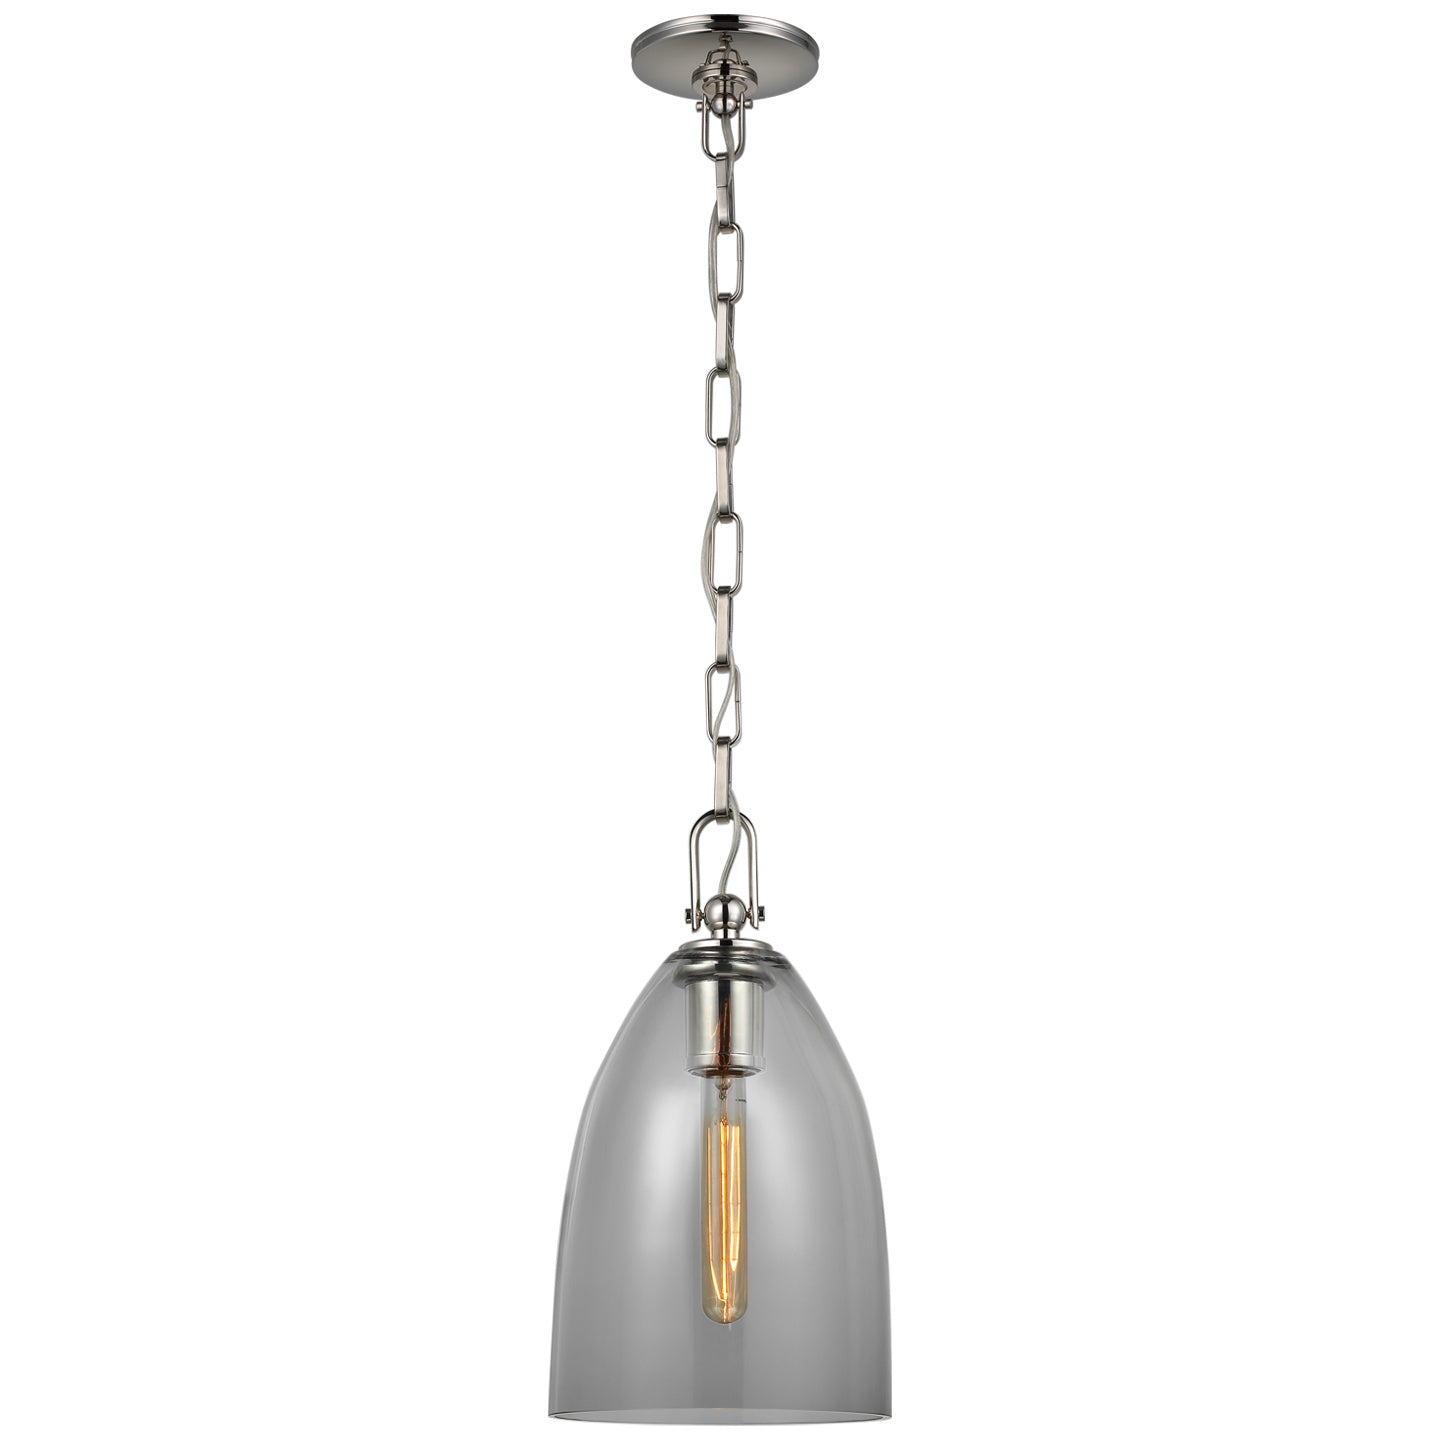 Visual Comfort Signature - CHC 5425PN-SMG - LED Pendant - Andros - Polished Nickel